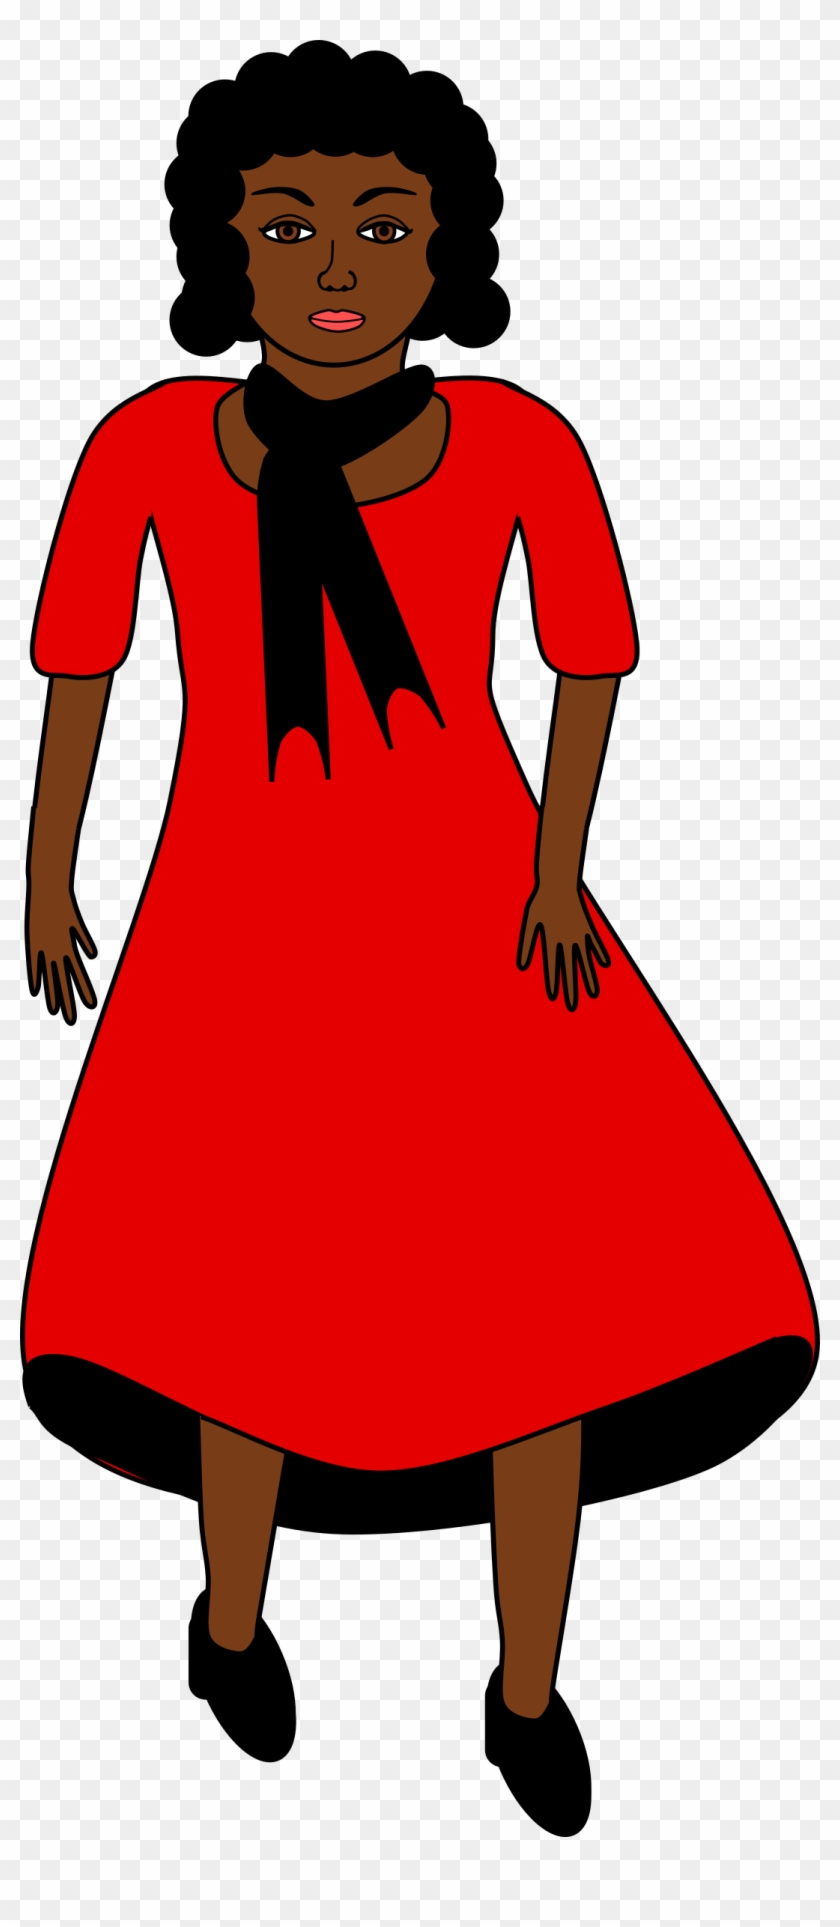 This Free Icons Png Design Of Red Dress In The Wind - Lady In Red Dress Clipart Transparent Png #1849536